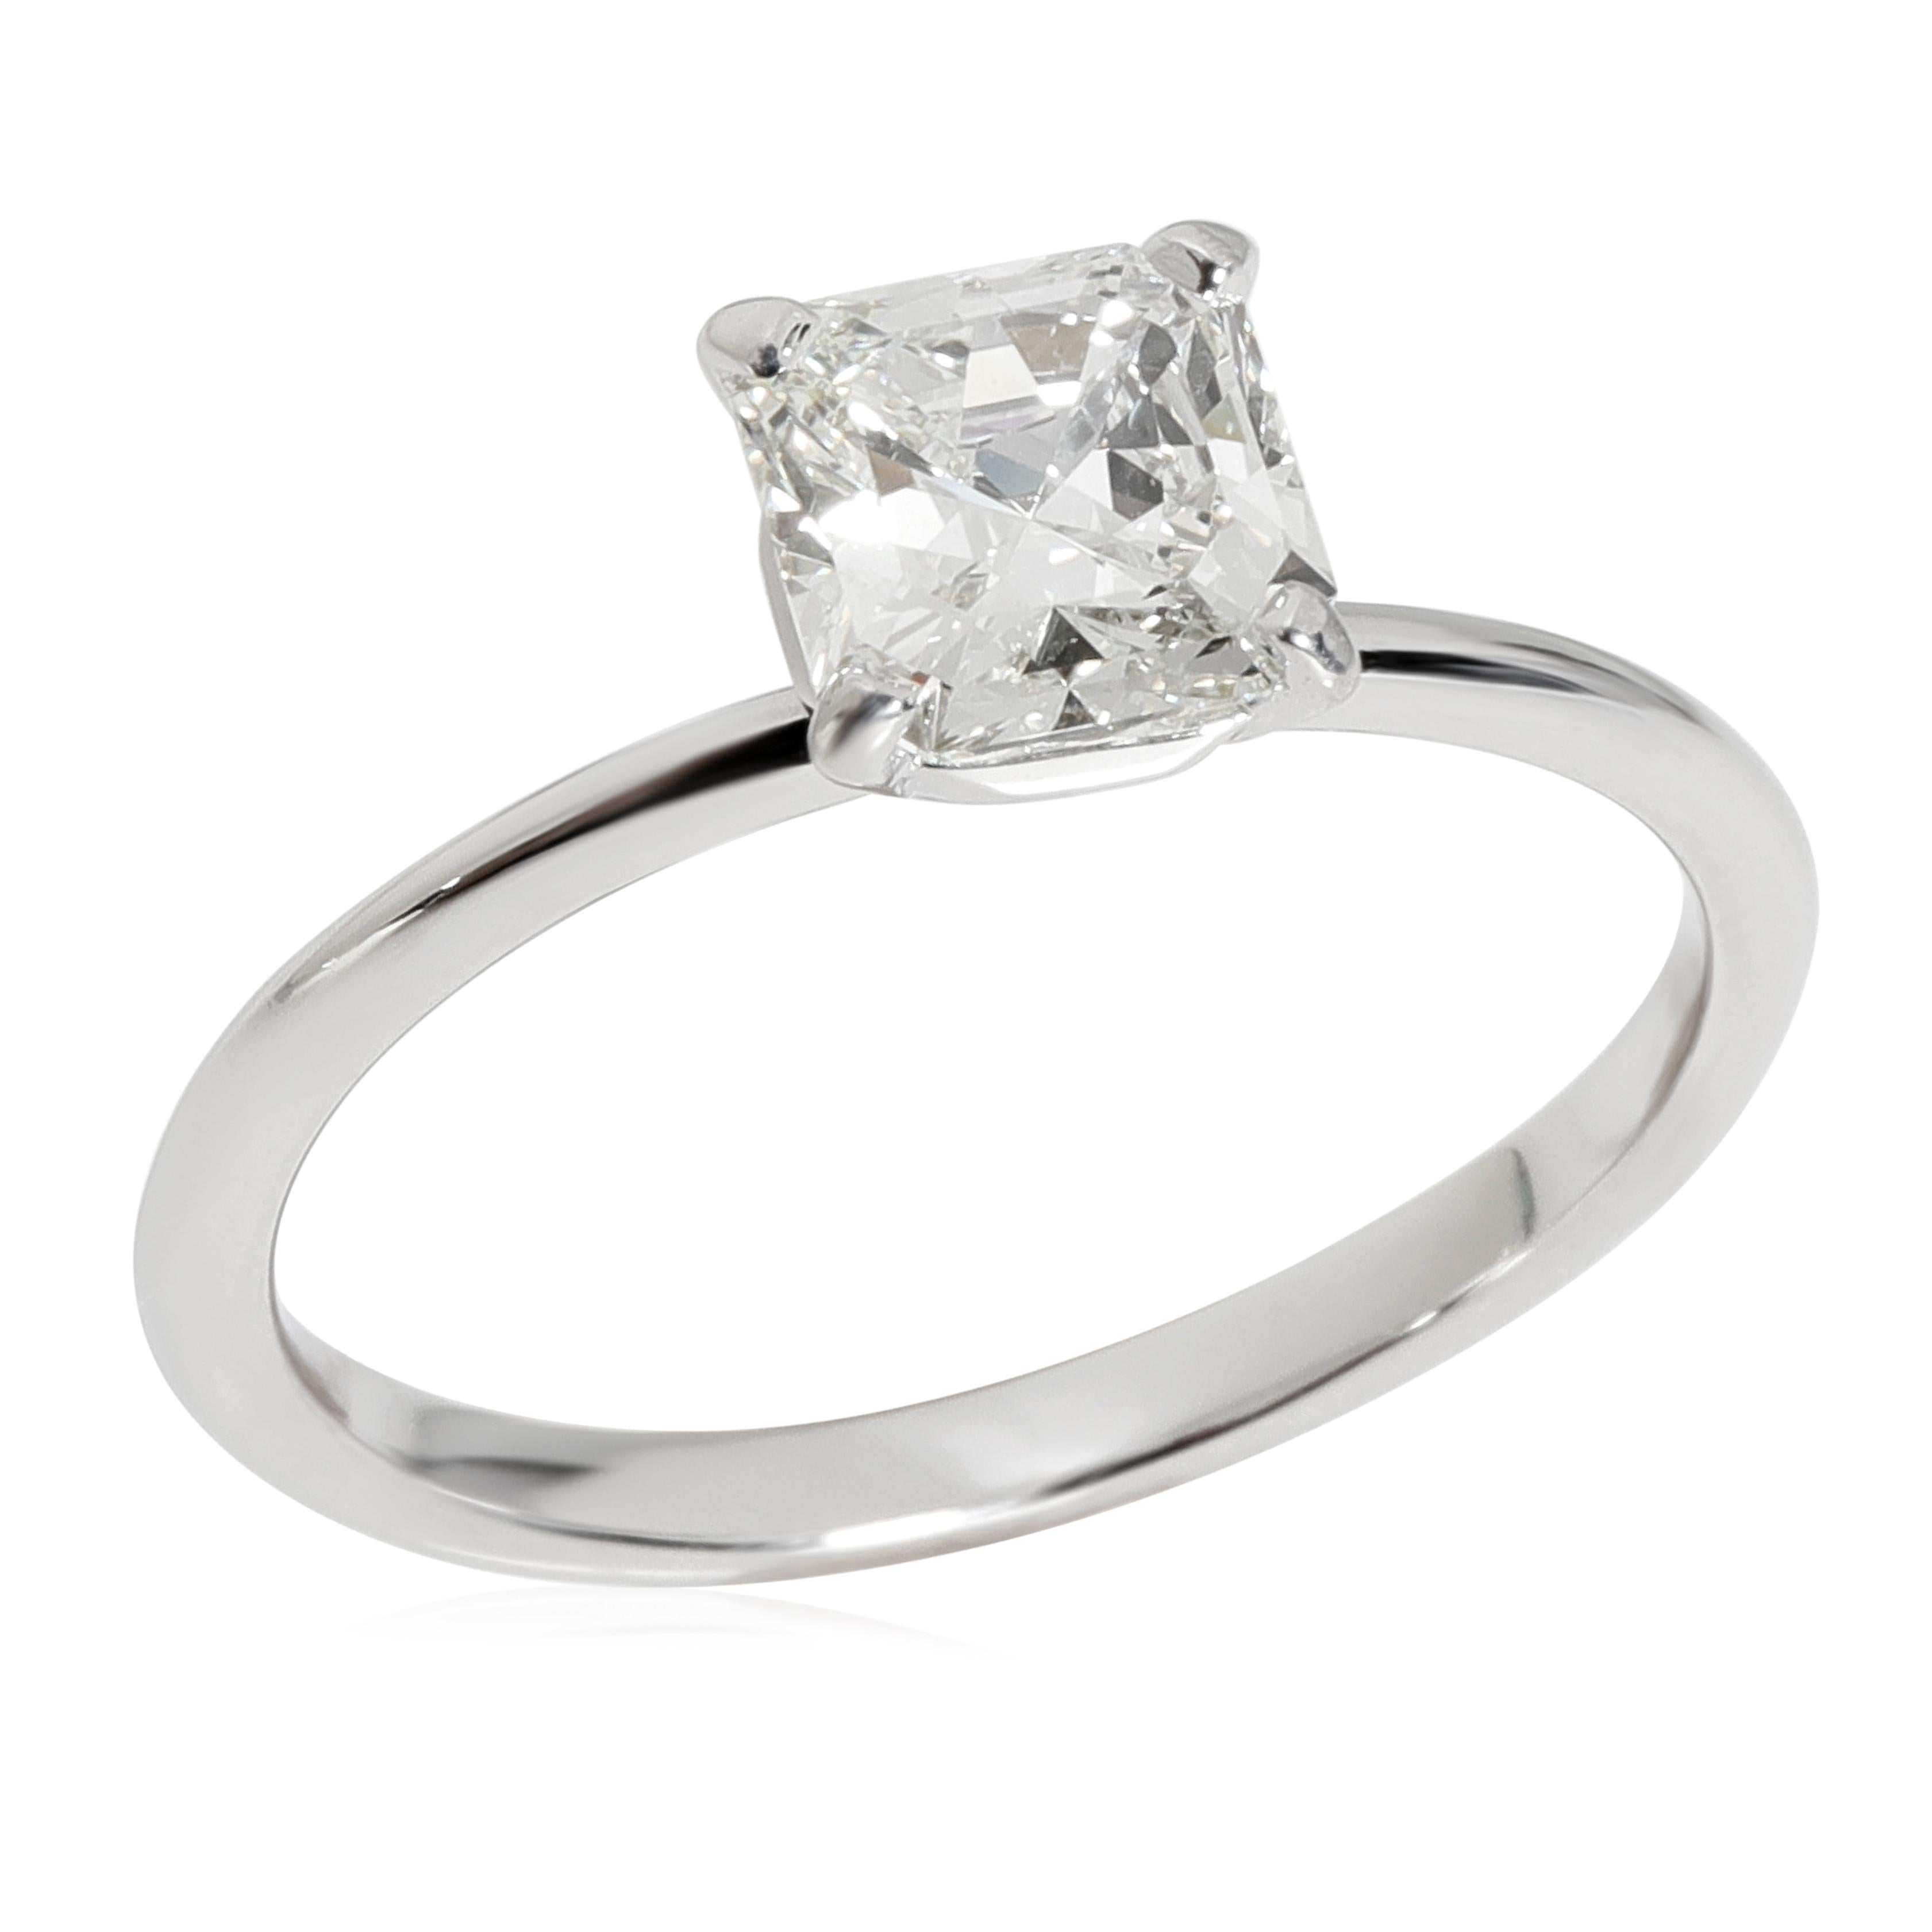 Tiffany & Co. Diamond Engagement Ring in Platinum G-H VS1 1.01 CTW

PRIMARY DETAILS
SKU: 117111
Listing Title: Tiffany & Co. Diamond Engagement Ring in Platinum G-H VS1 1.01 CTW
Condition Description: Retails for 17600 USD. In excellent condition